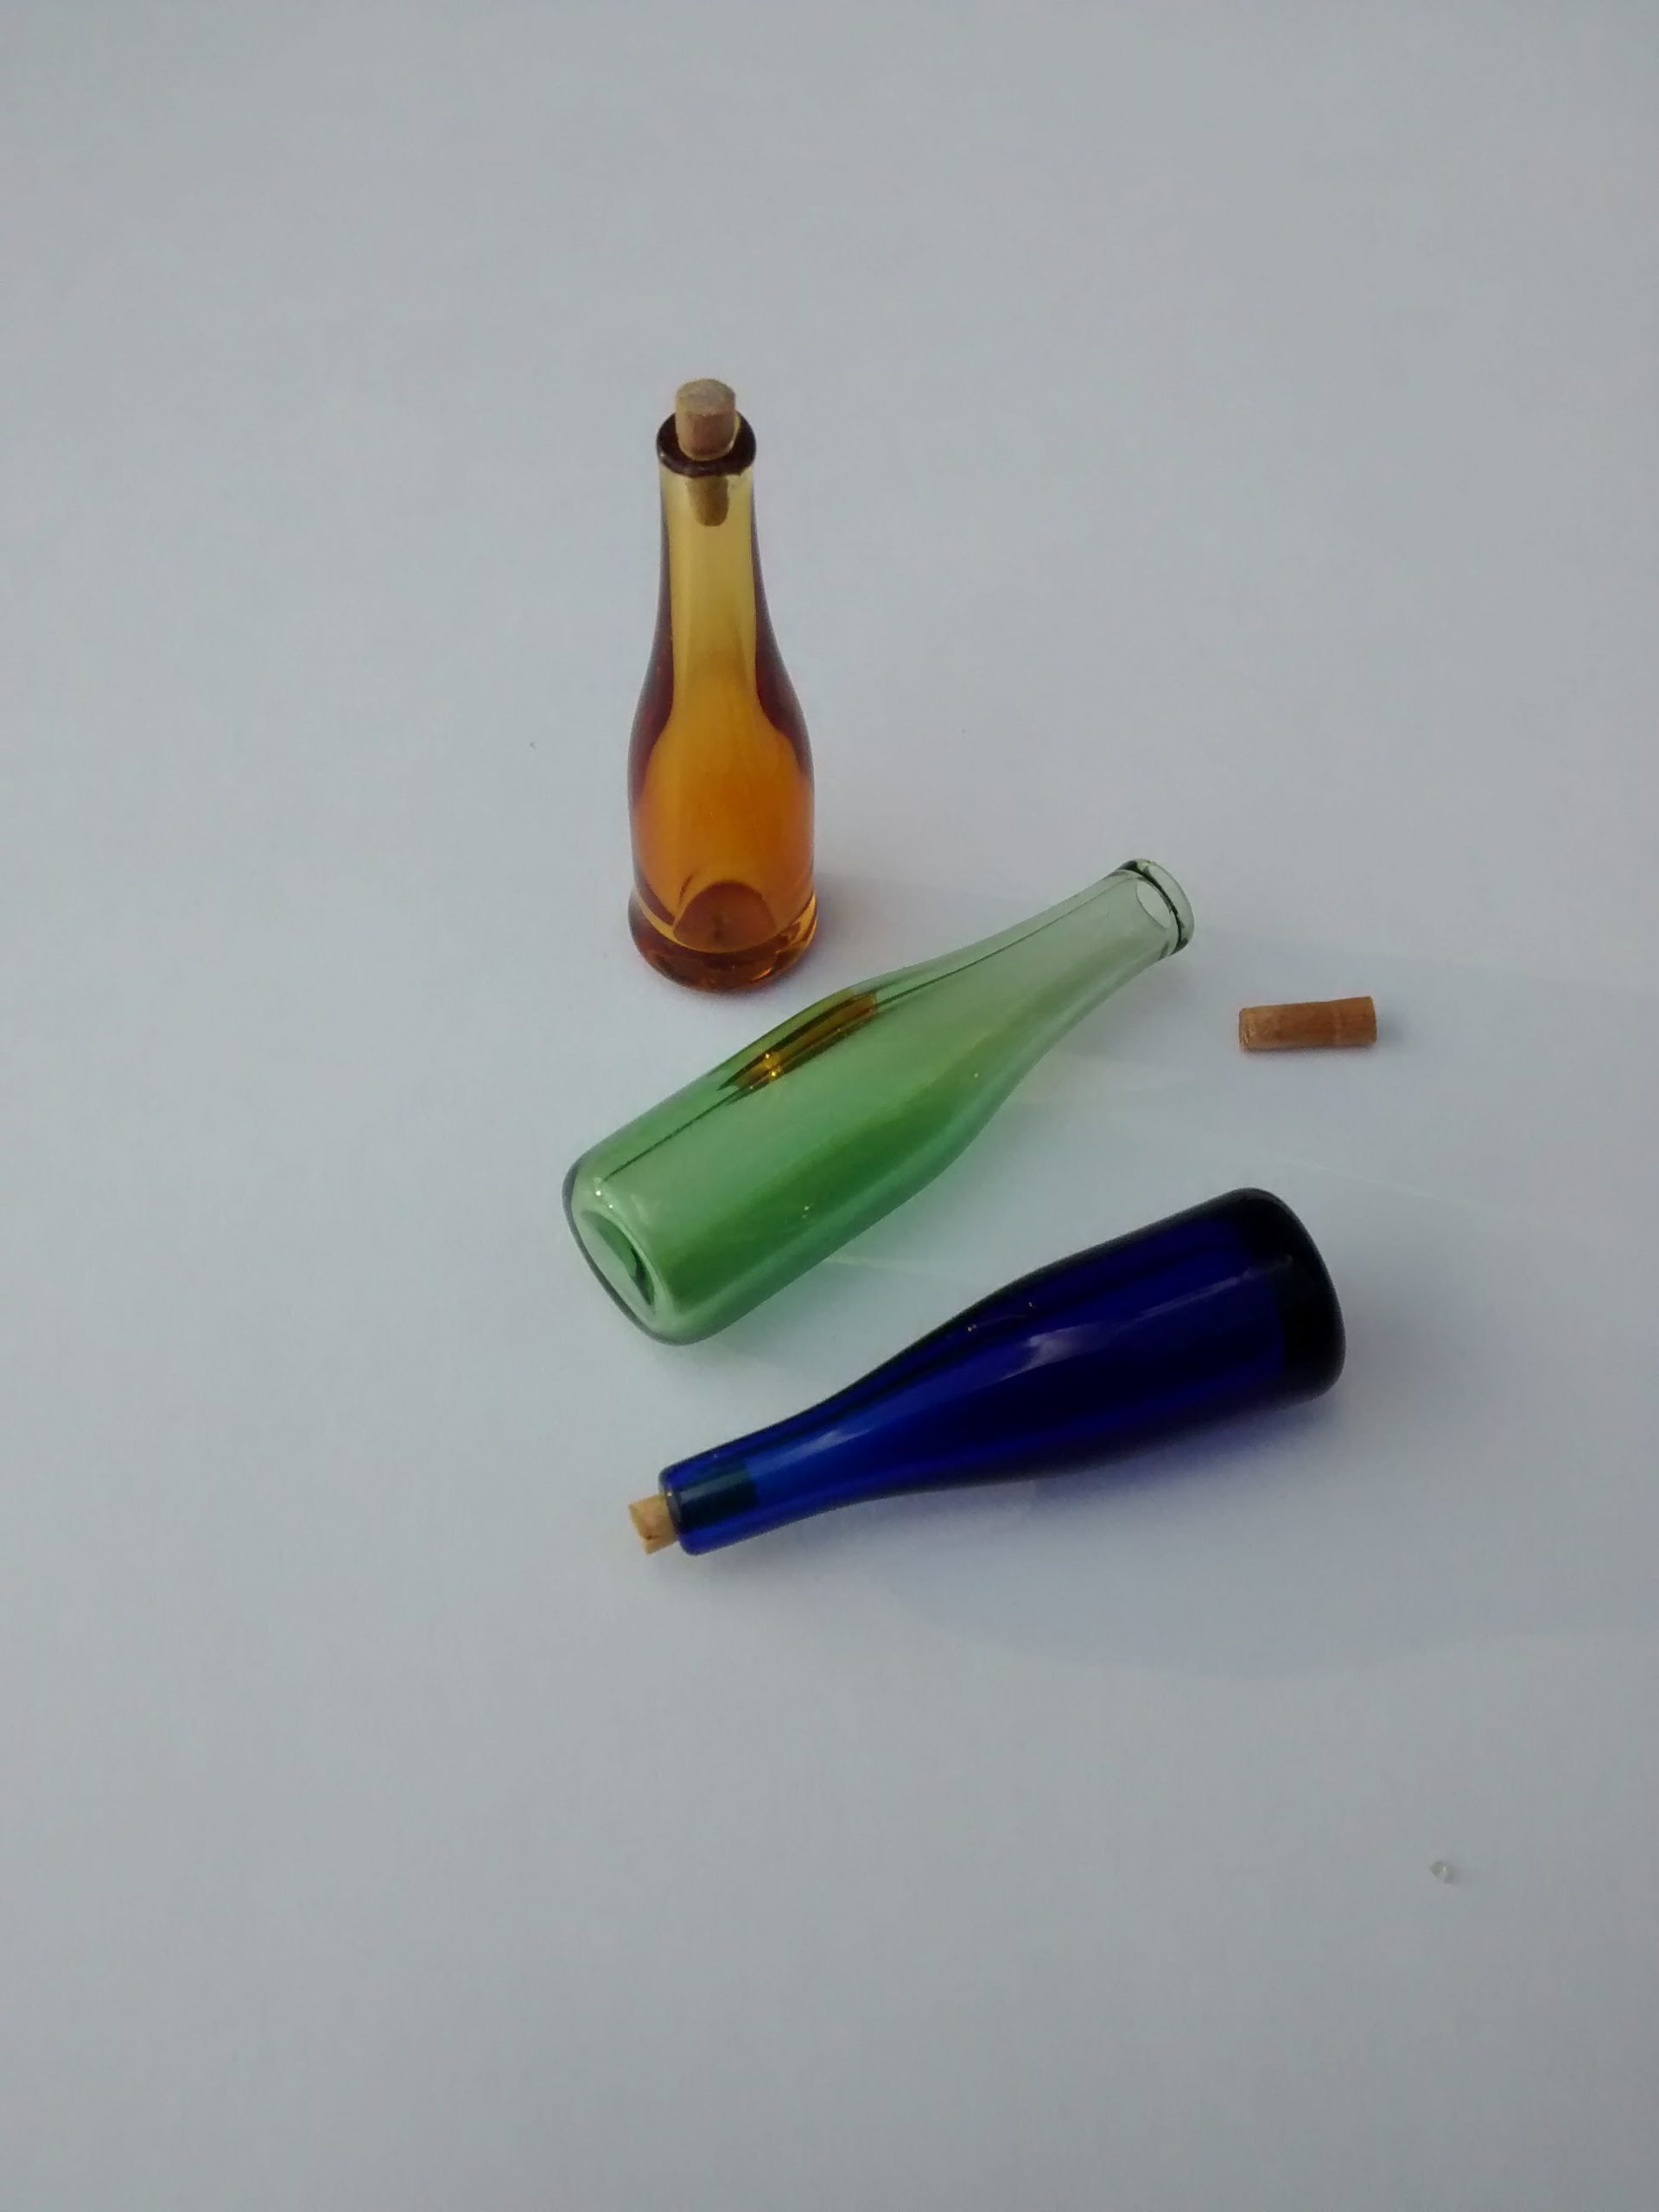 1 Inch Scale Assorted Wine Bottles and Glasses Set Dollhouse Miniature